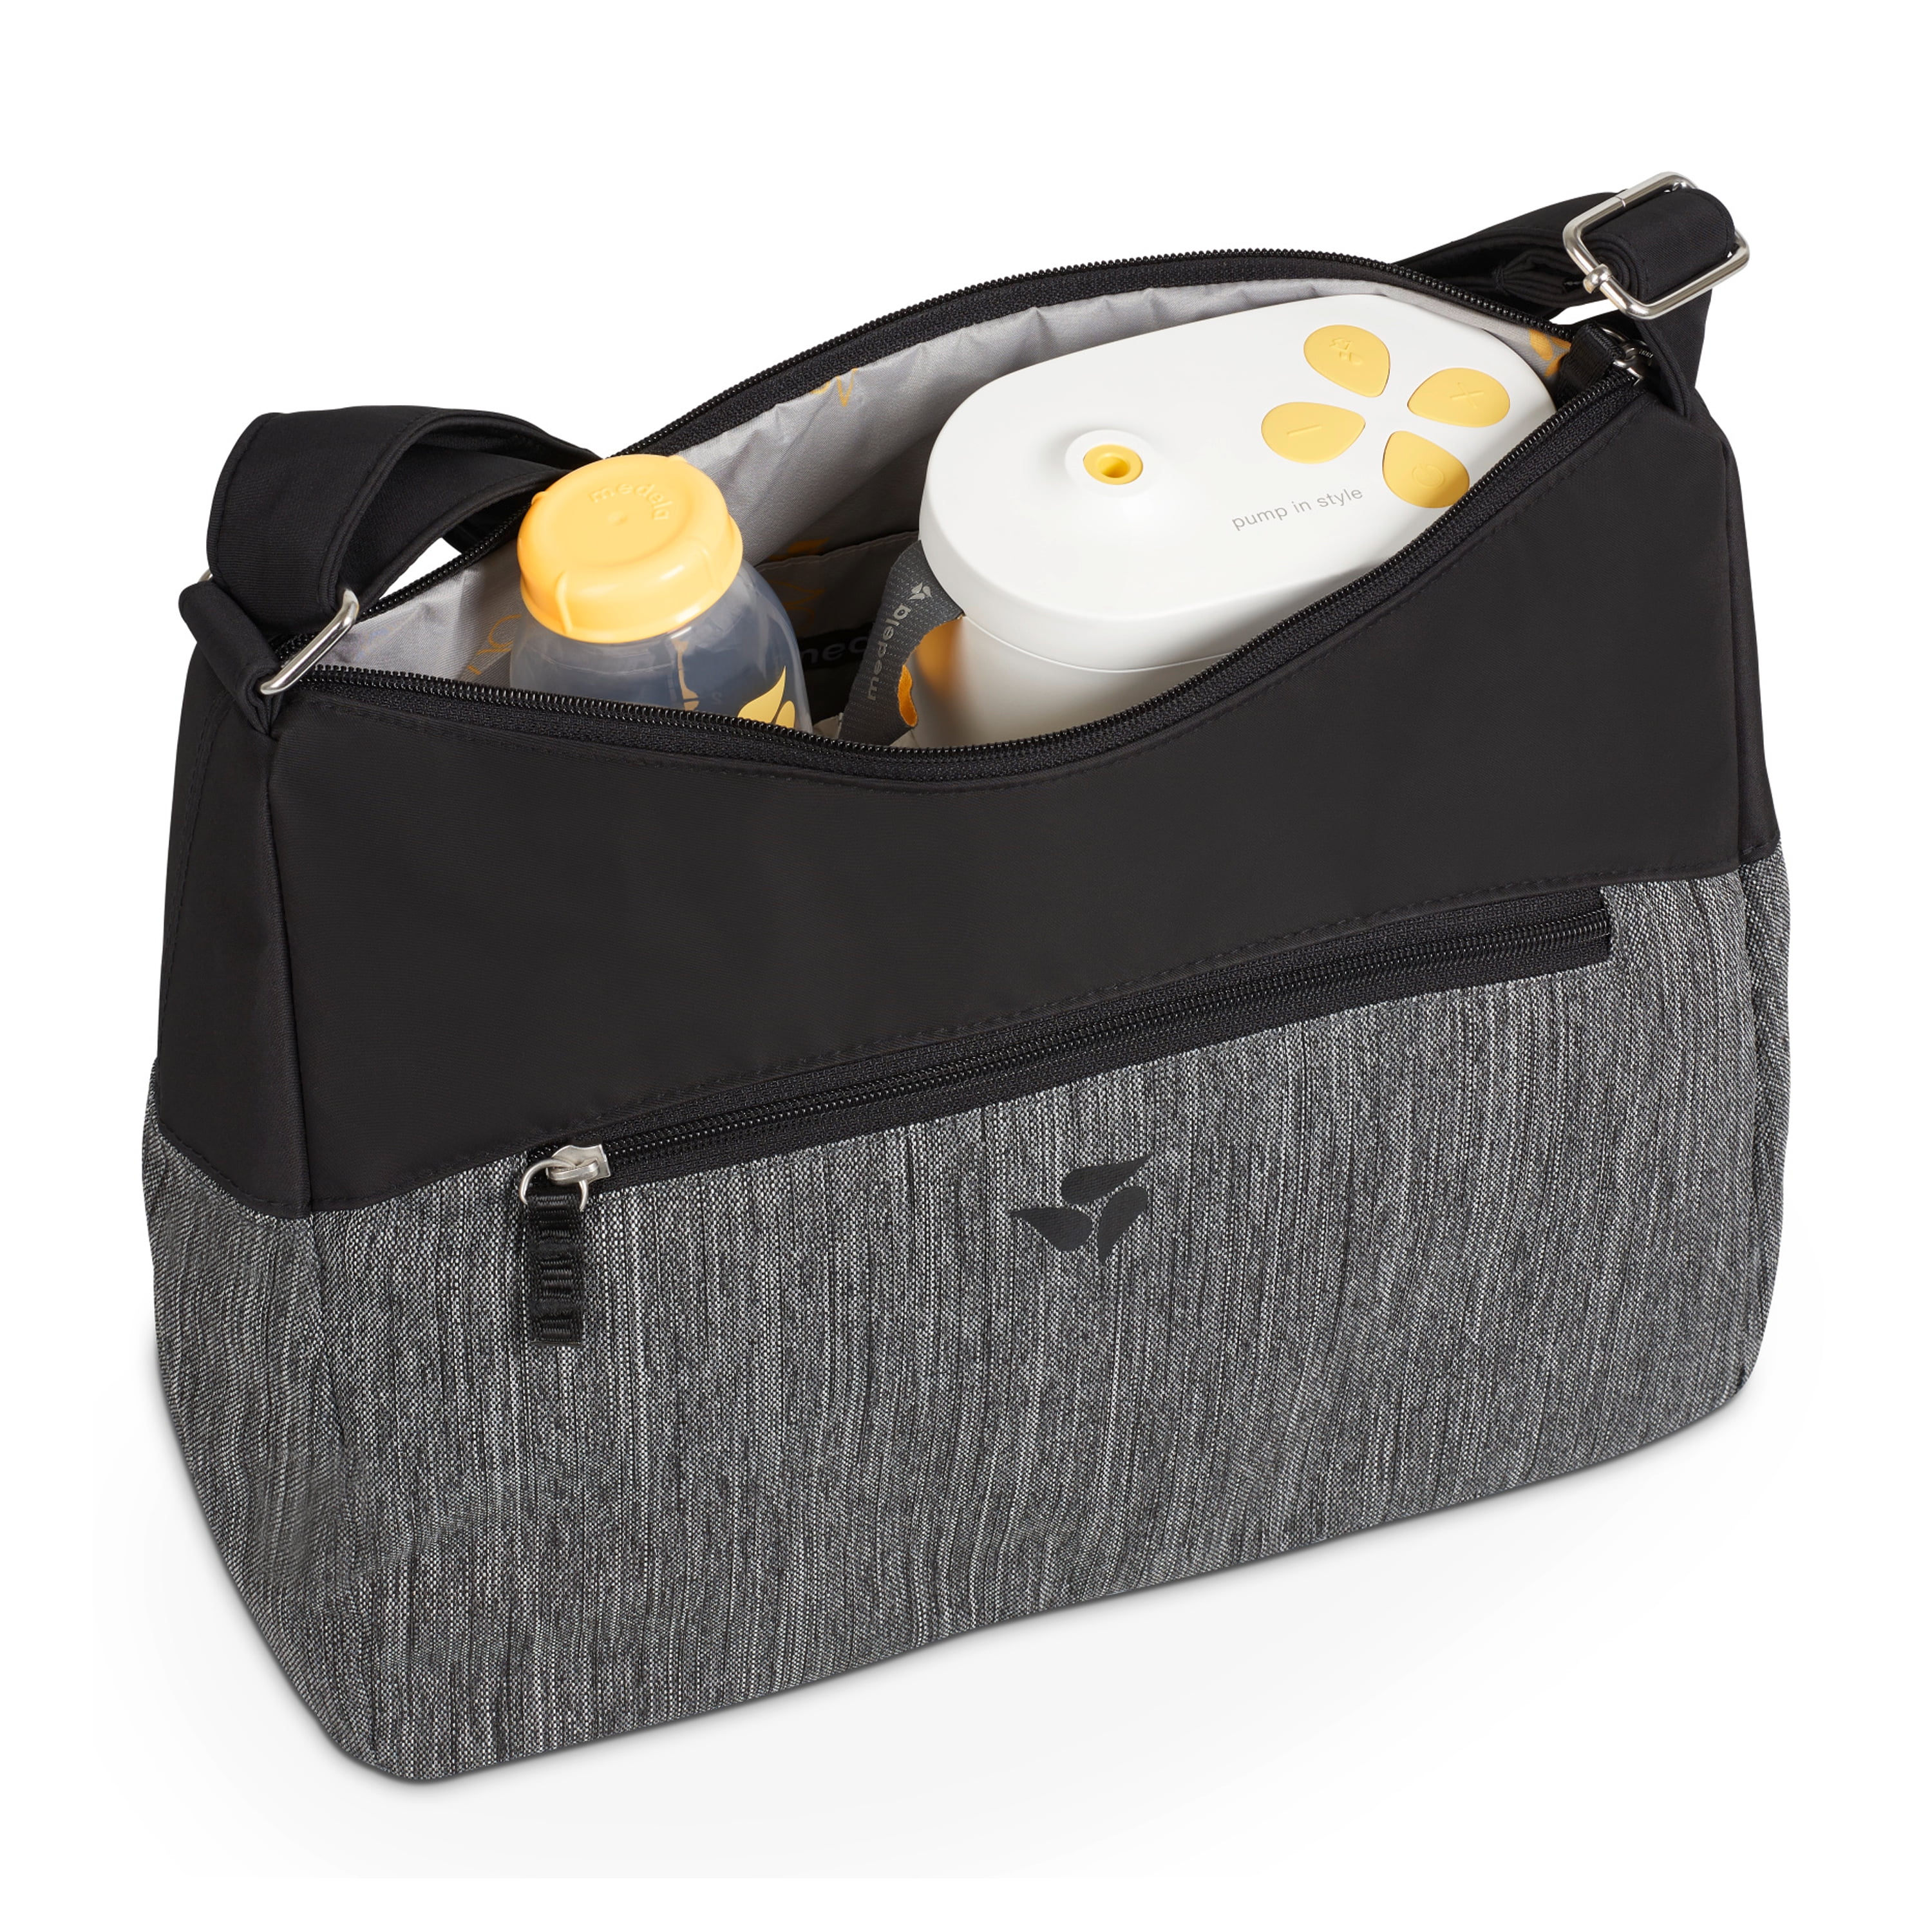 Medela Pump in Style with MaxFlow Double Electric Breast Pump